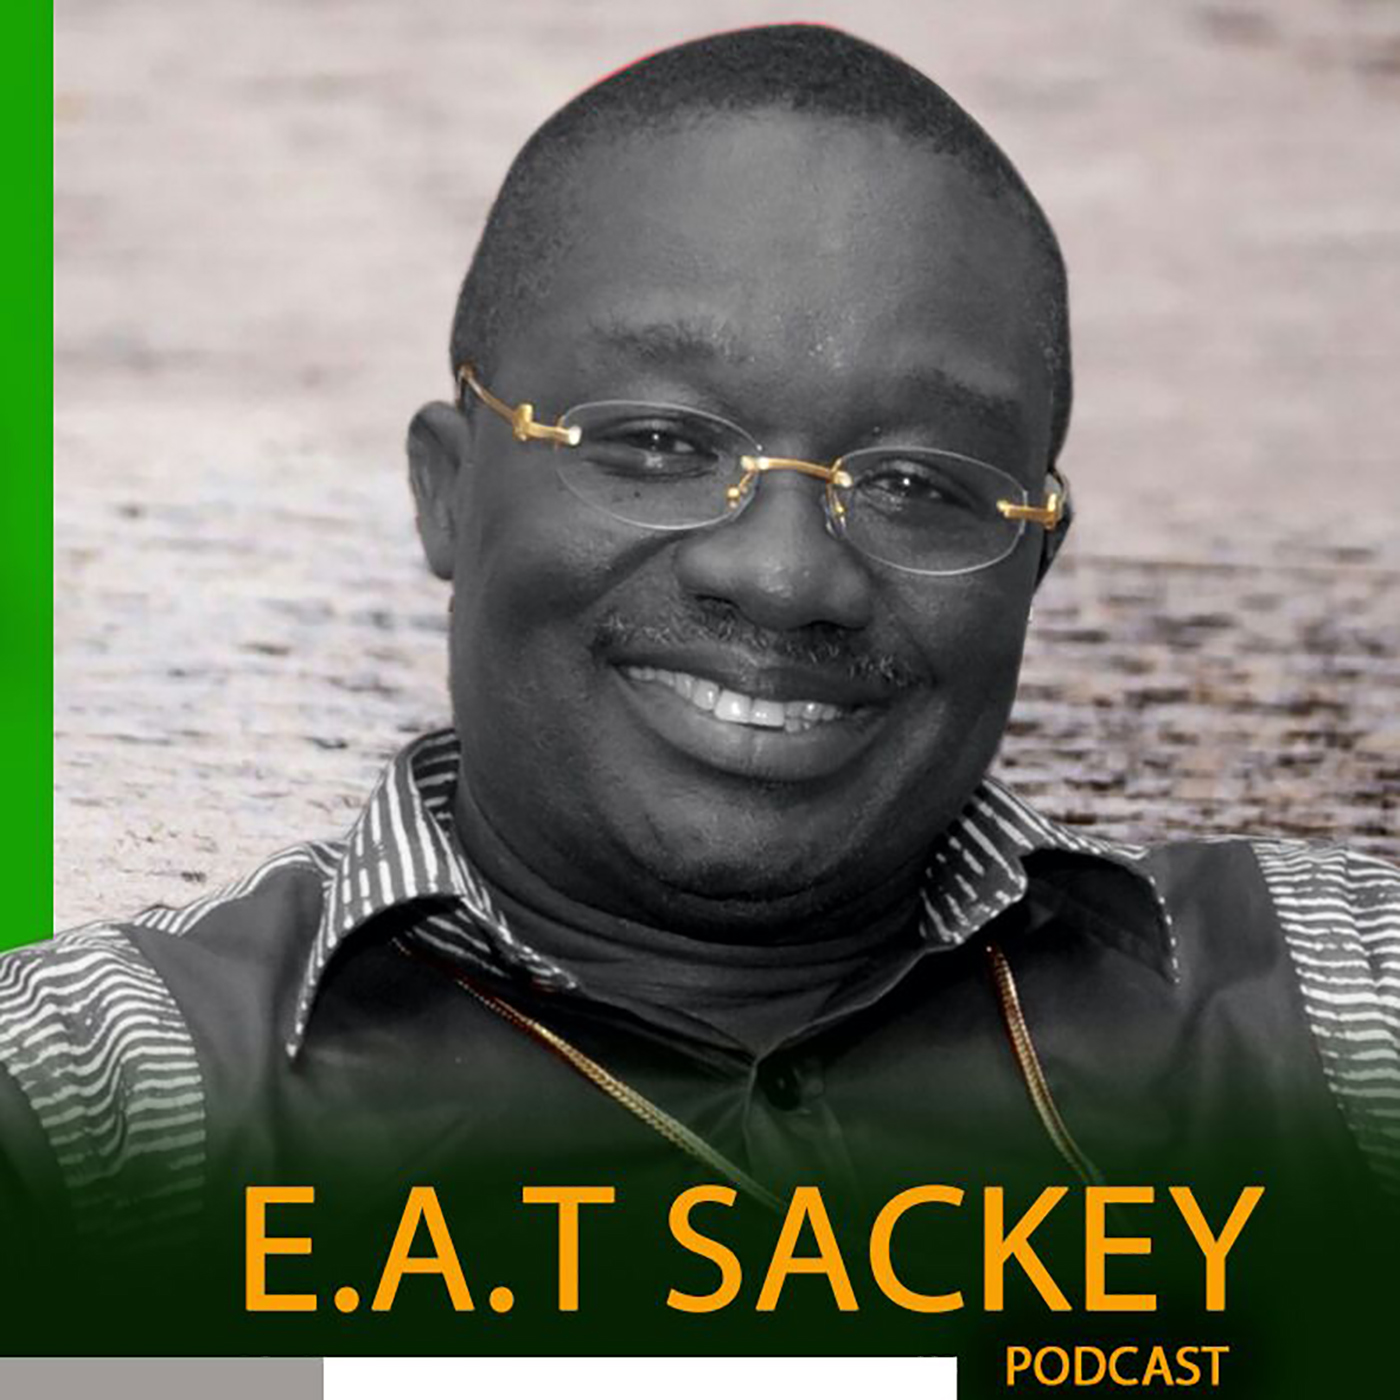 TITHE IS THE WAY OUT - BISHOP E. A. T. SACKEY